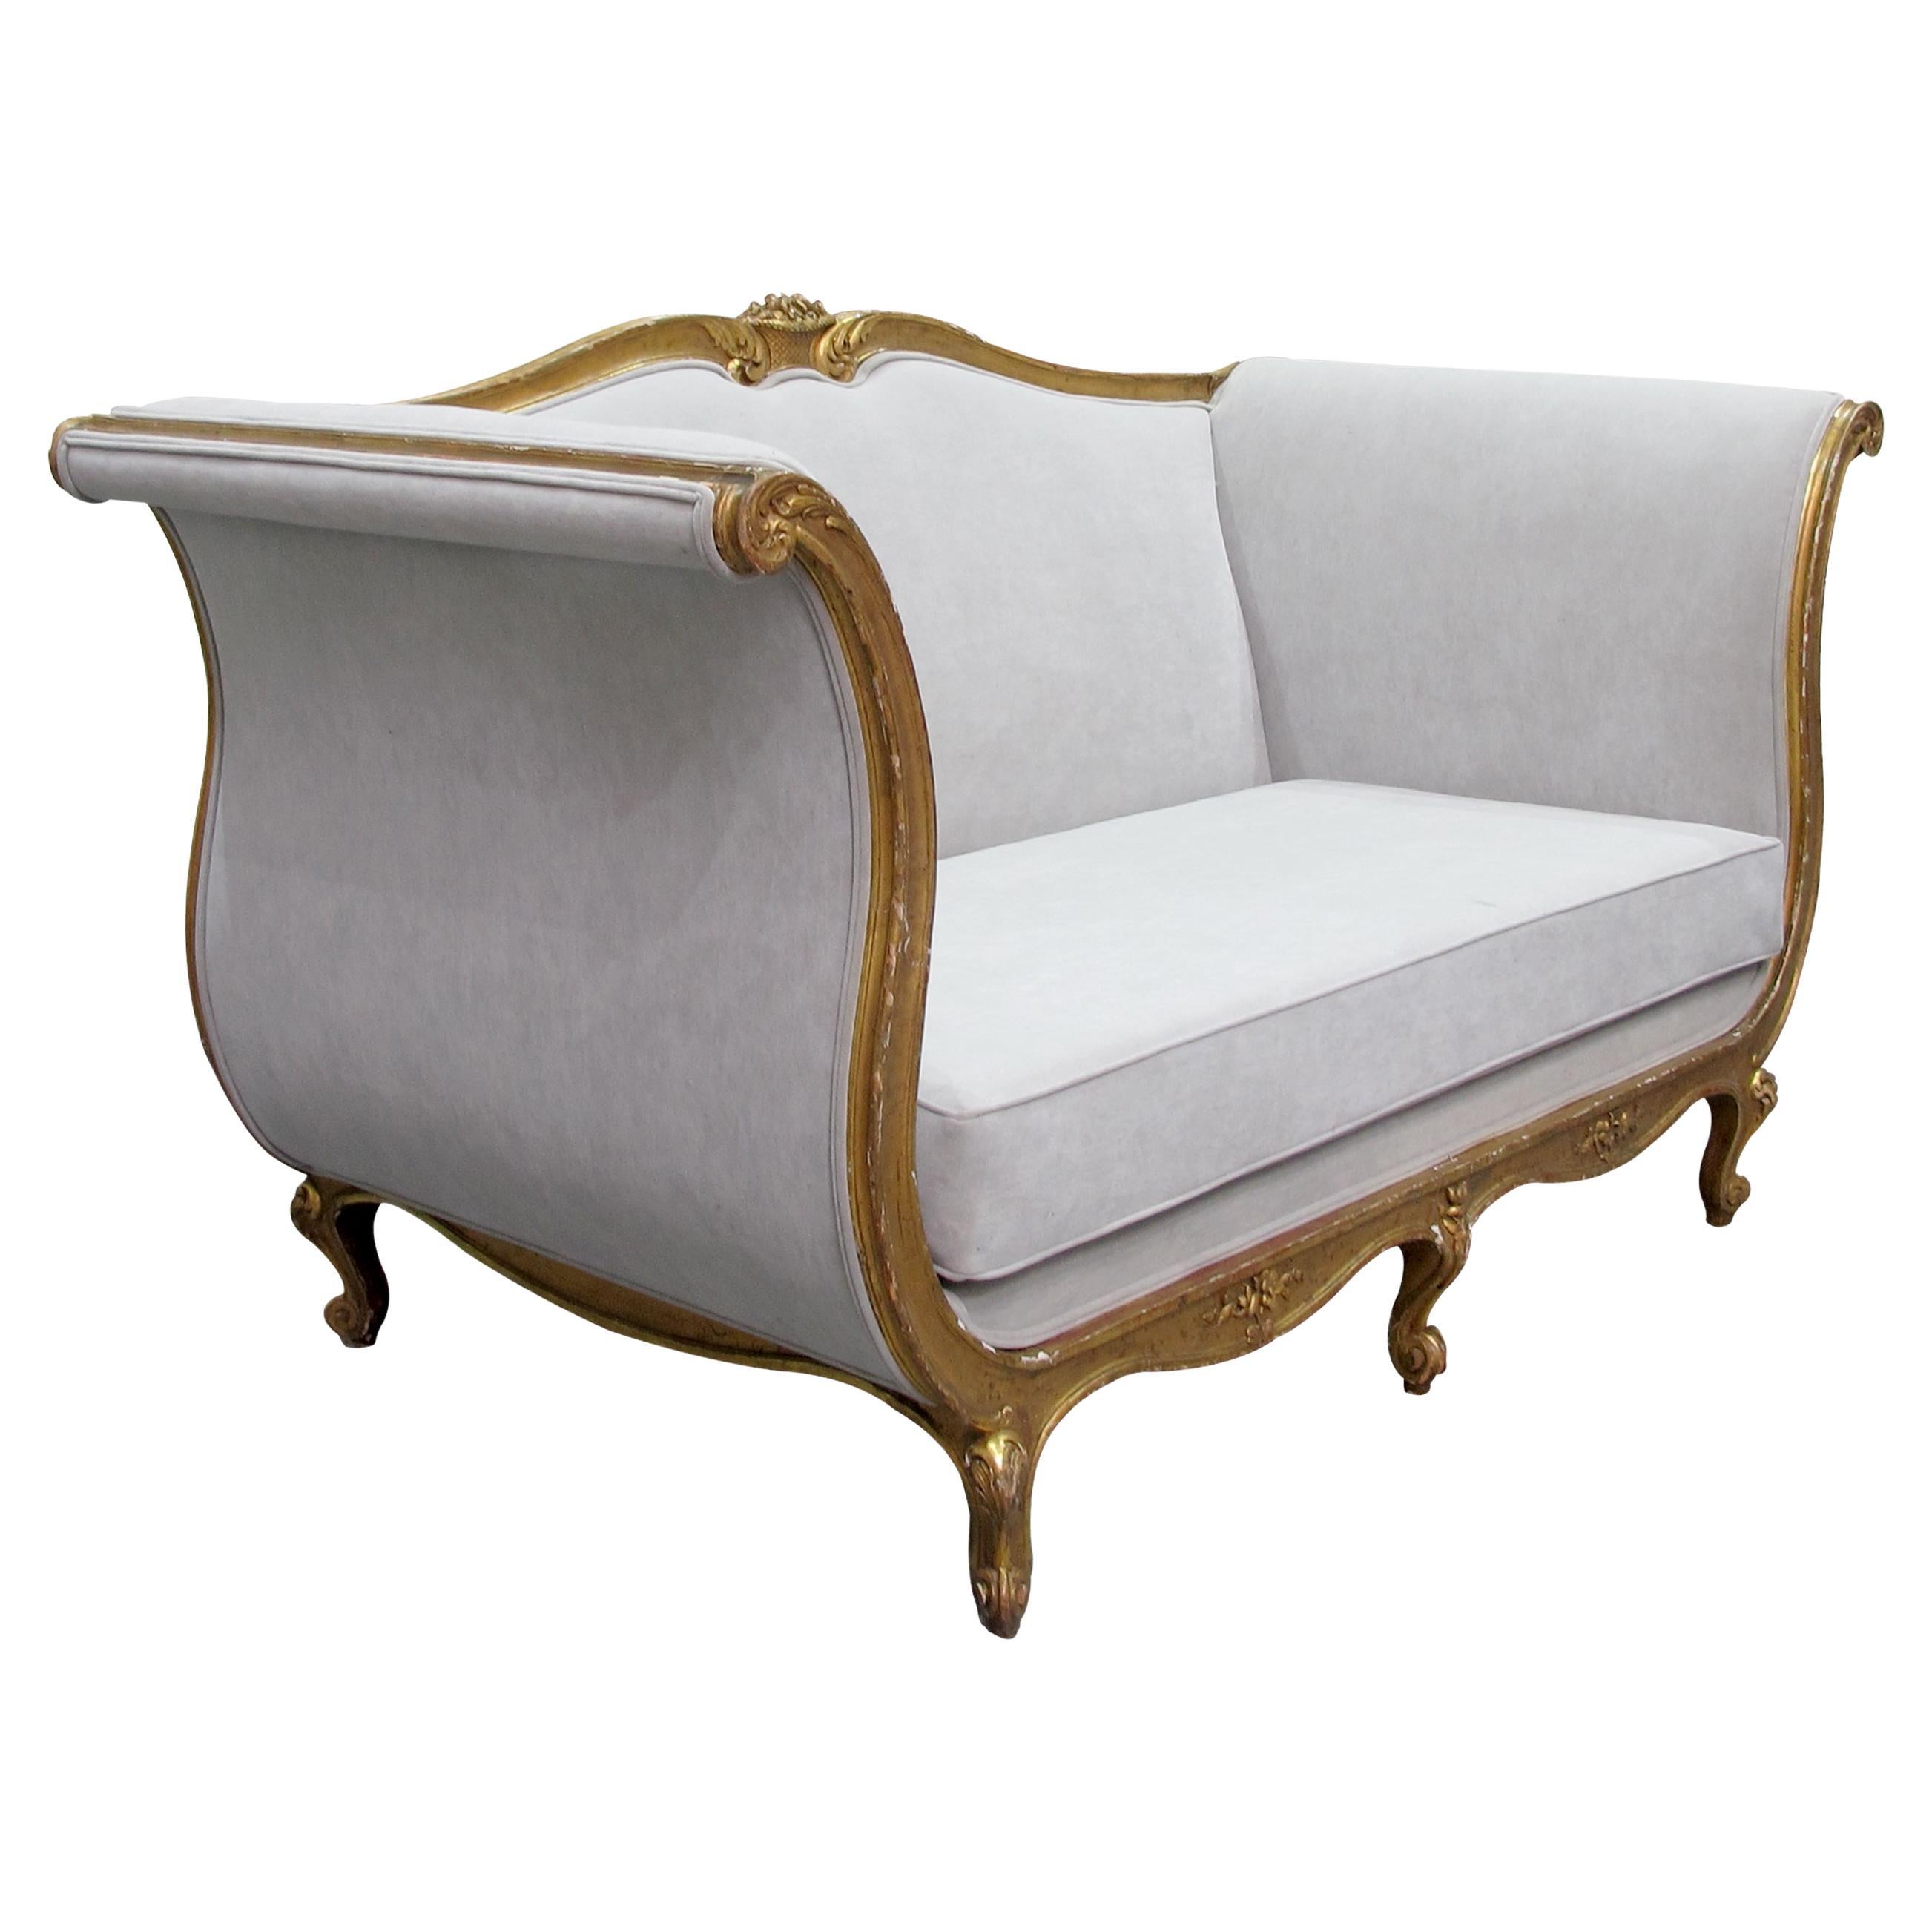 Late 19th Century French Large Gilt Frame Sofa Newly Upholstered For Sale